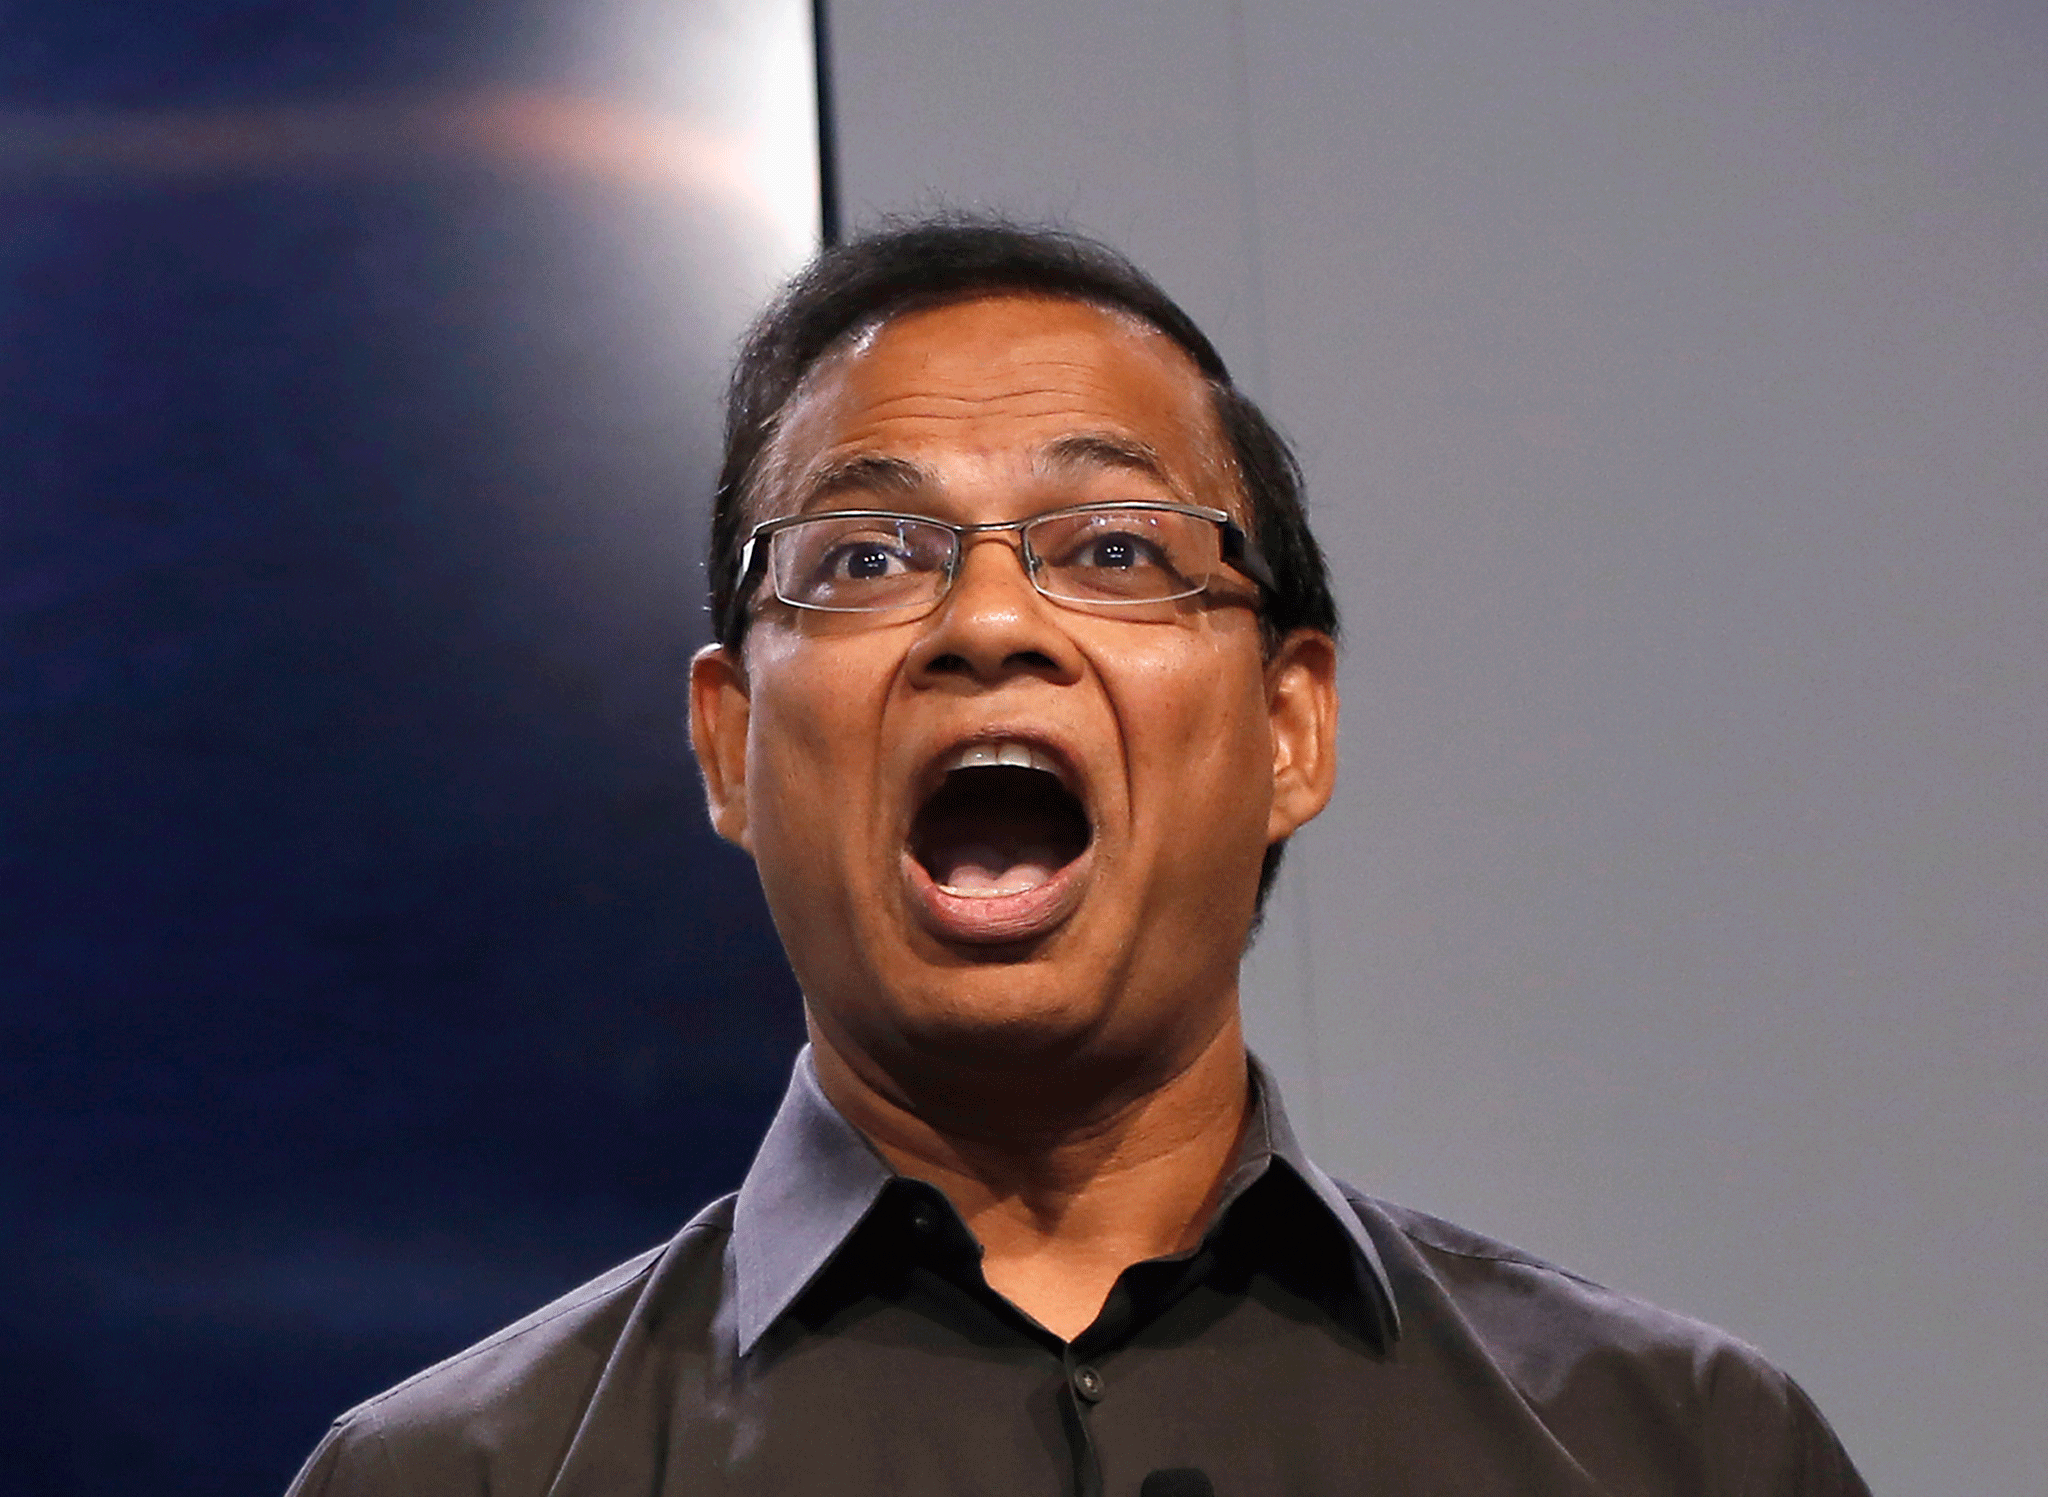 Amit Singhal, joined Uber just one month ago in a high-profile move, after fifteen years as head of search at Google